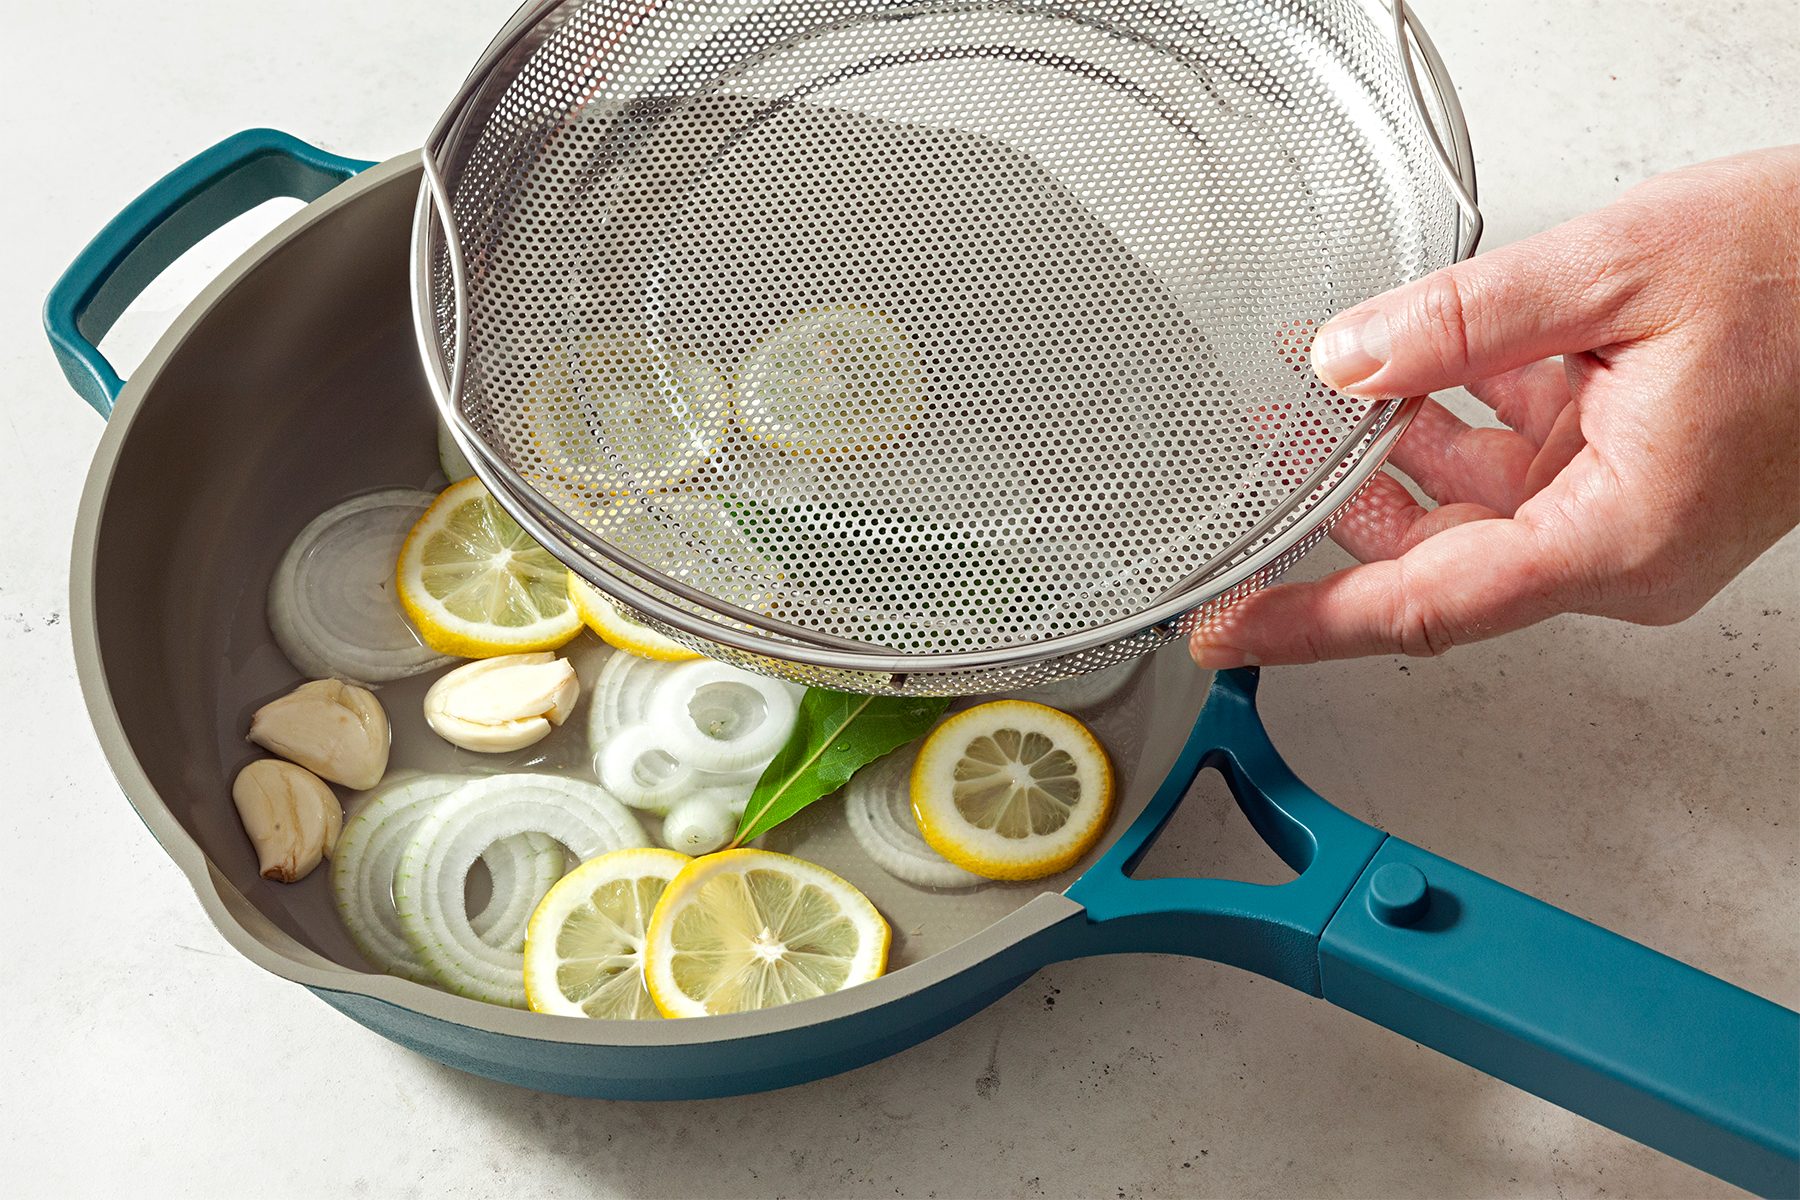 A person holding a mesh lid above a turquoise frying pan containing sliced onions, garlic cloves, lemon slices, and a bay leaf.